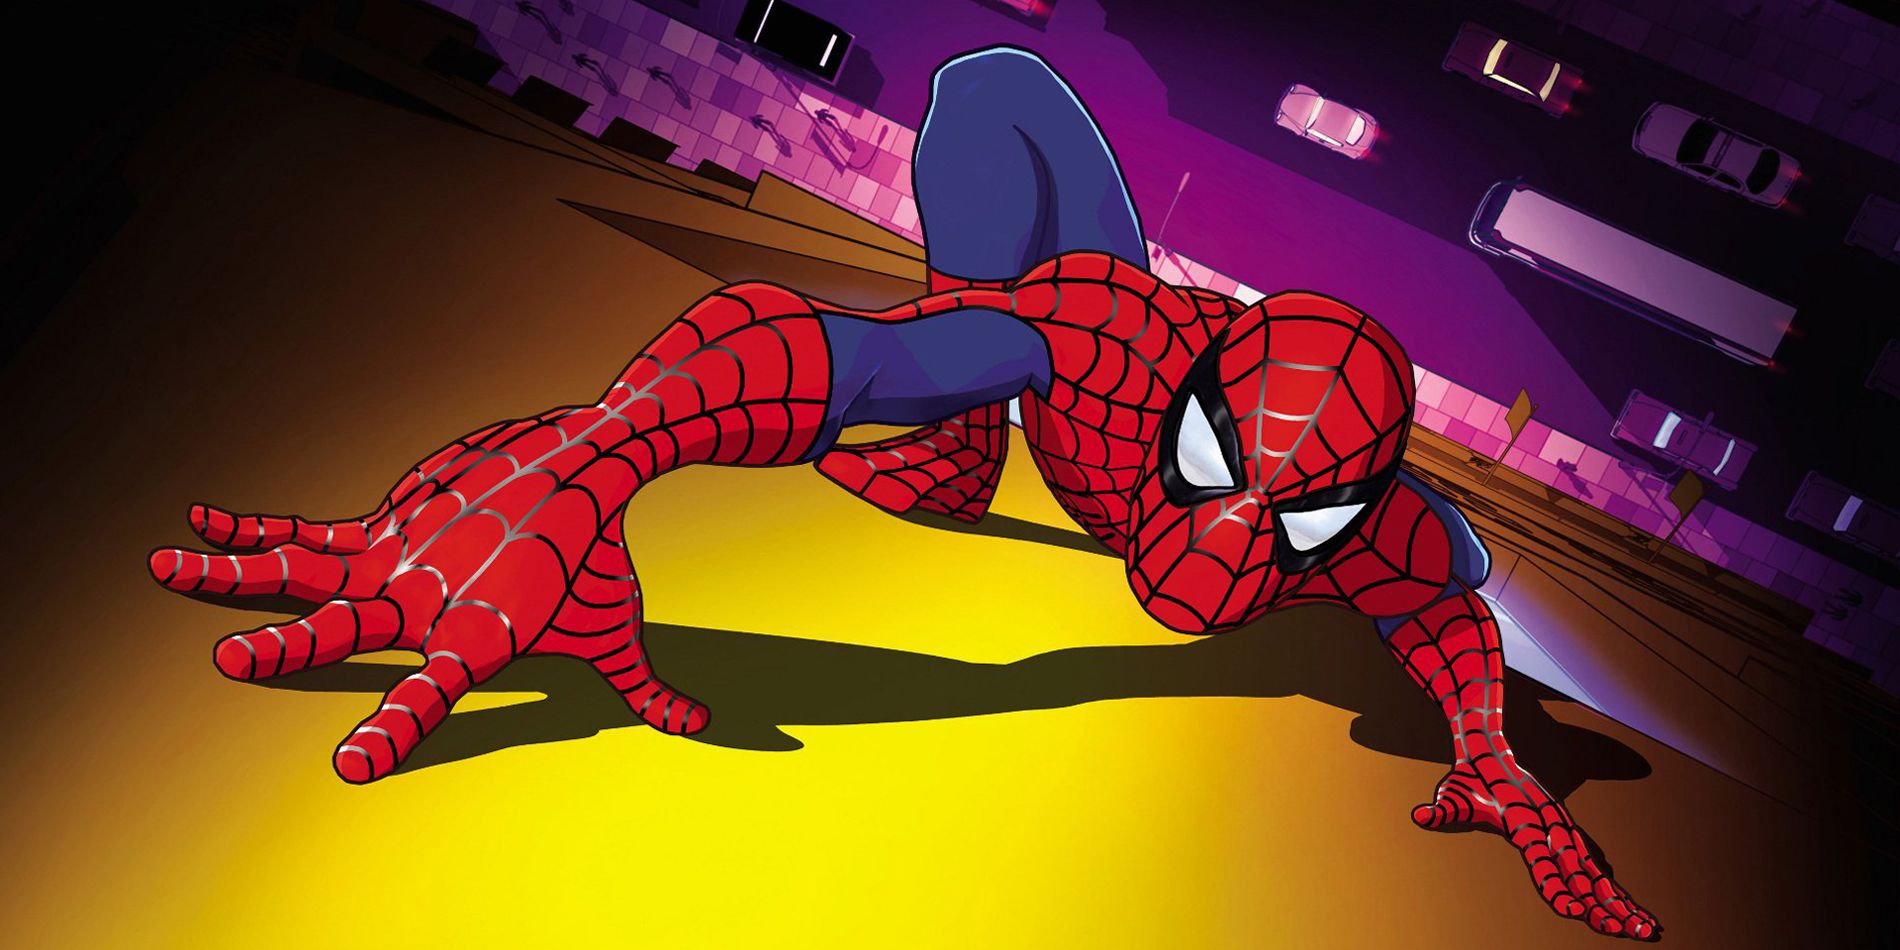 Spider-Man climbing a wall in Spider-Man New Animated series